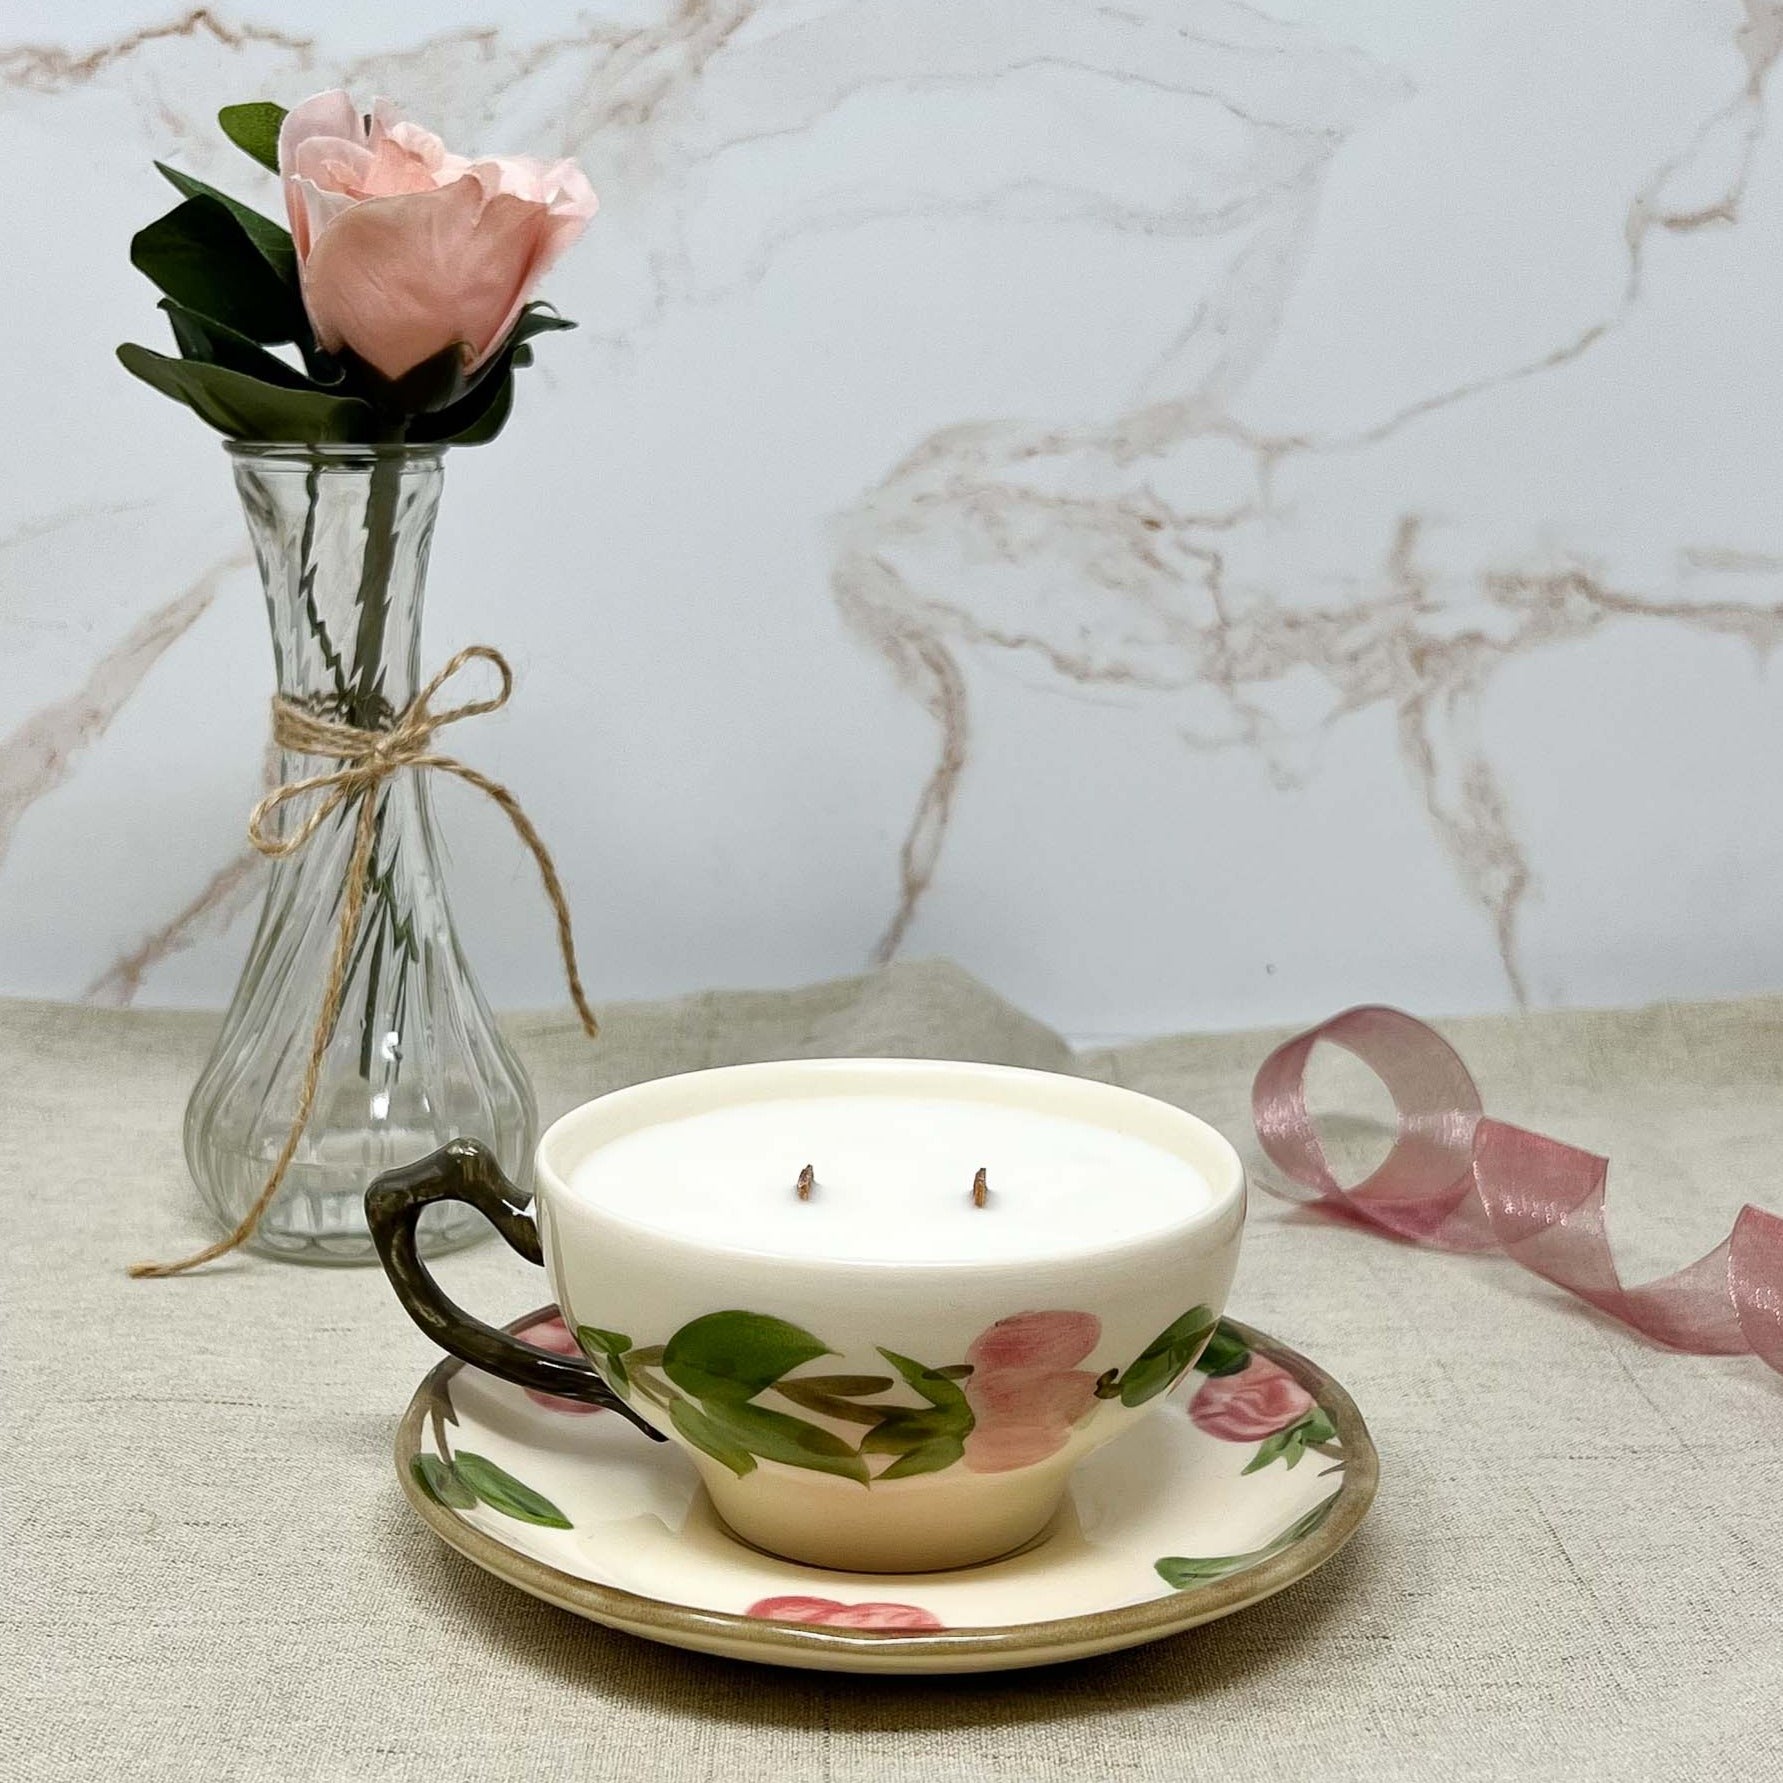 Desert Rose Teacup &amp; Saucer upcycled into a rose scented teacup candle with matching saucer.